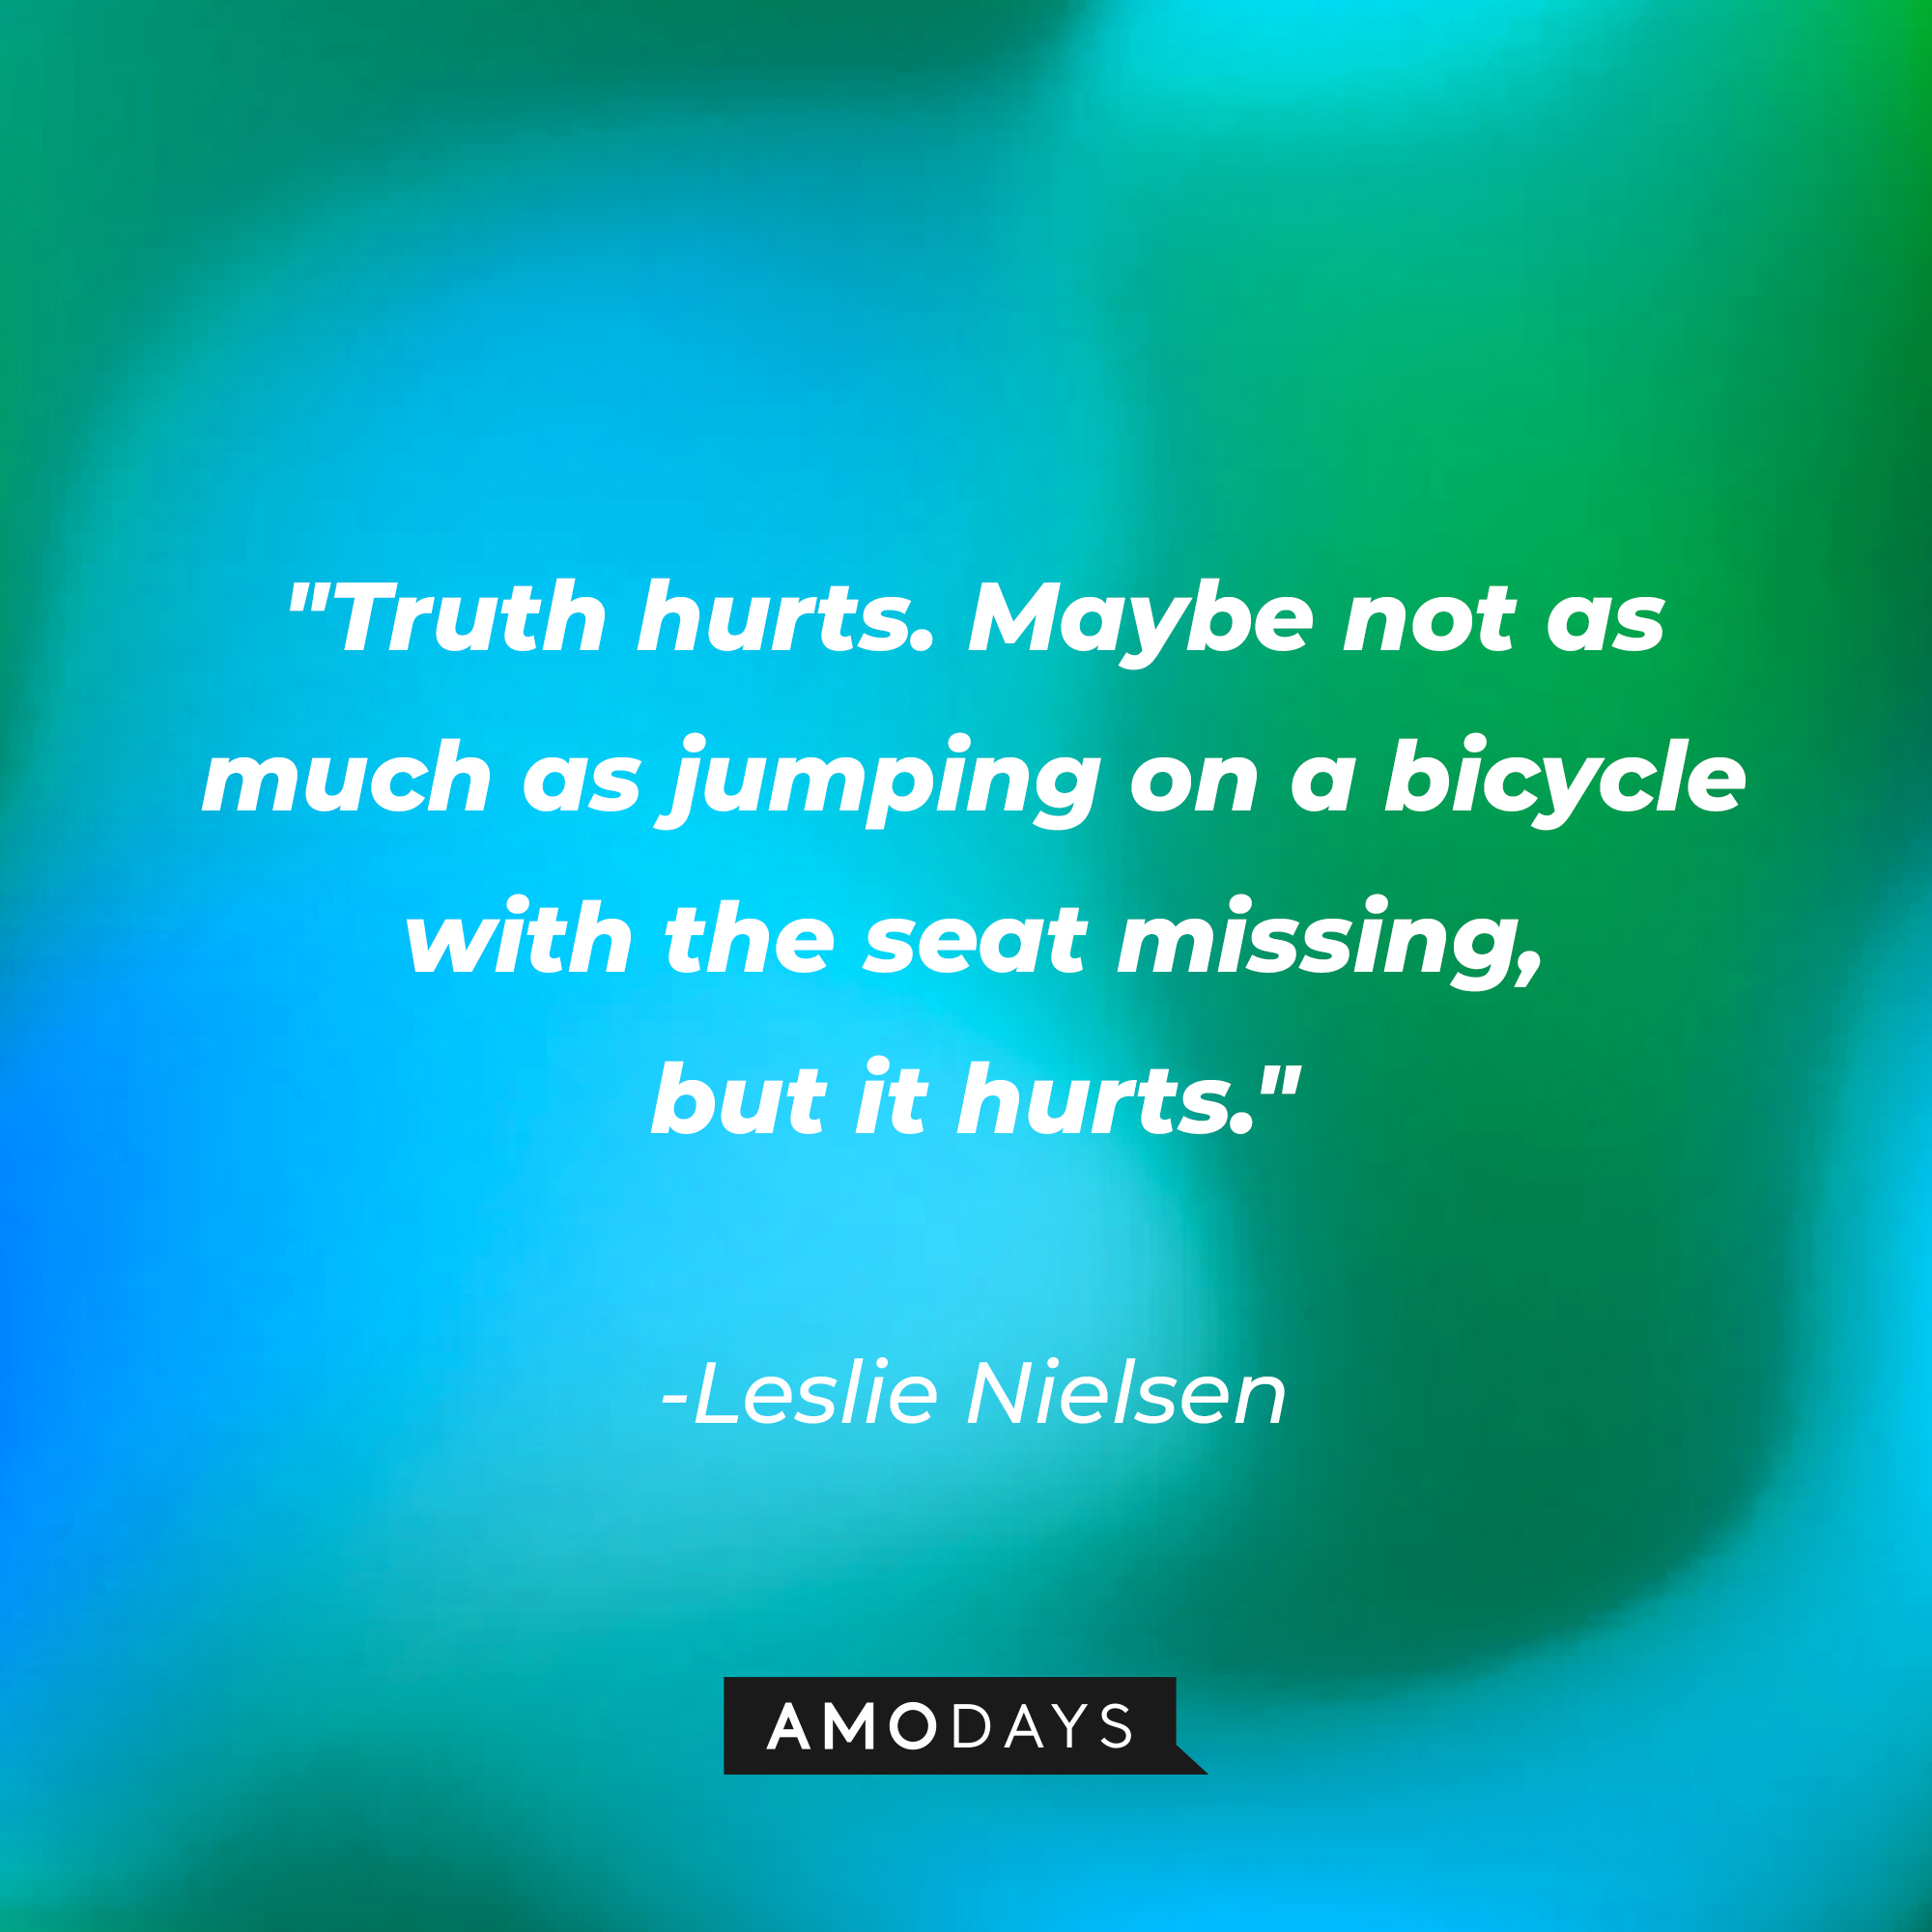 Leslie Nielsen's quote: "Truth hurts. Maybe not as much as jumping on a bicycle with the seat missing, but it hurts." | Source: Amodays